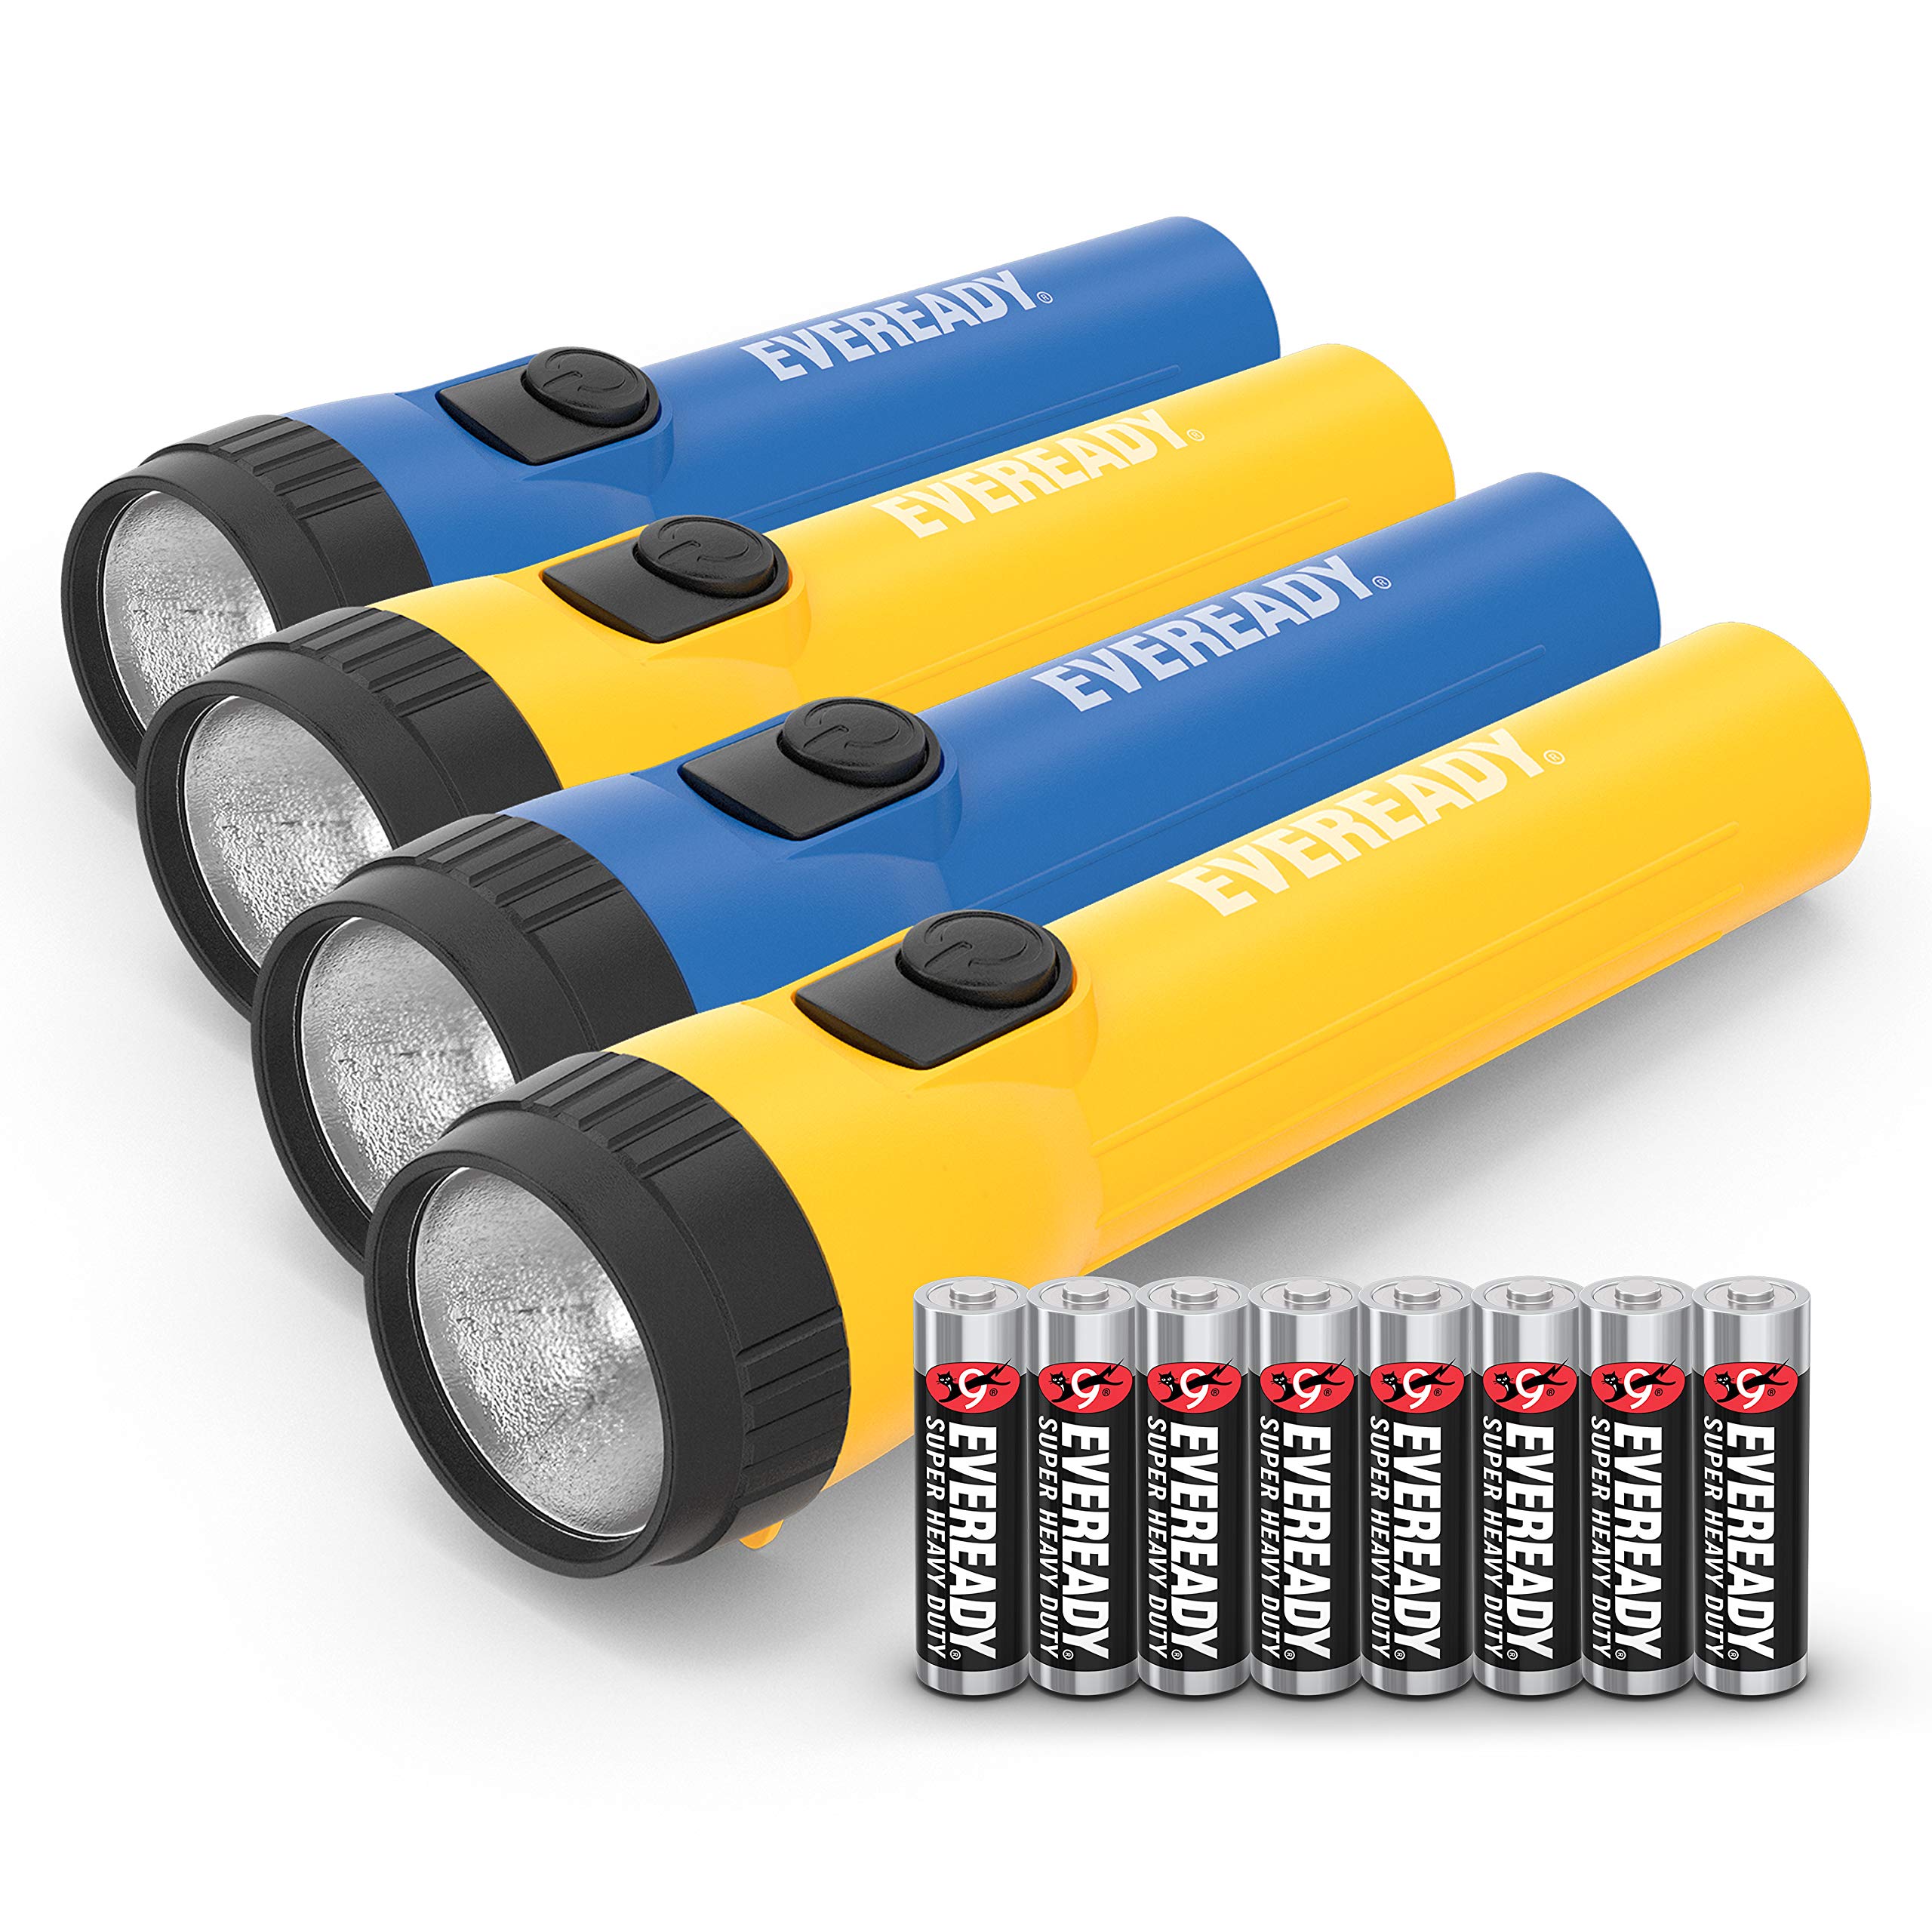 4-Count Eveready LED Flashlights w/ Batteries (Blue/Yellow) $7.49 + Free Shipping w/ Prime or on orders over $35